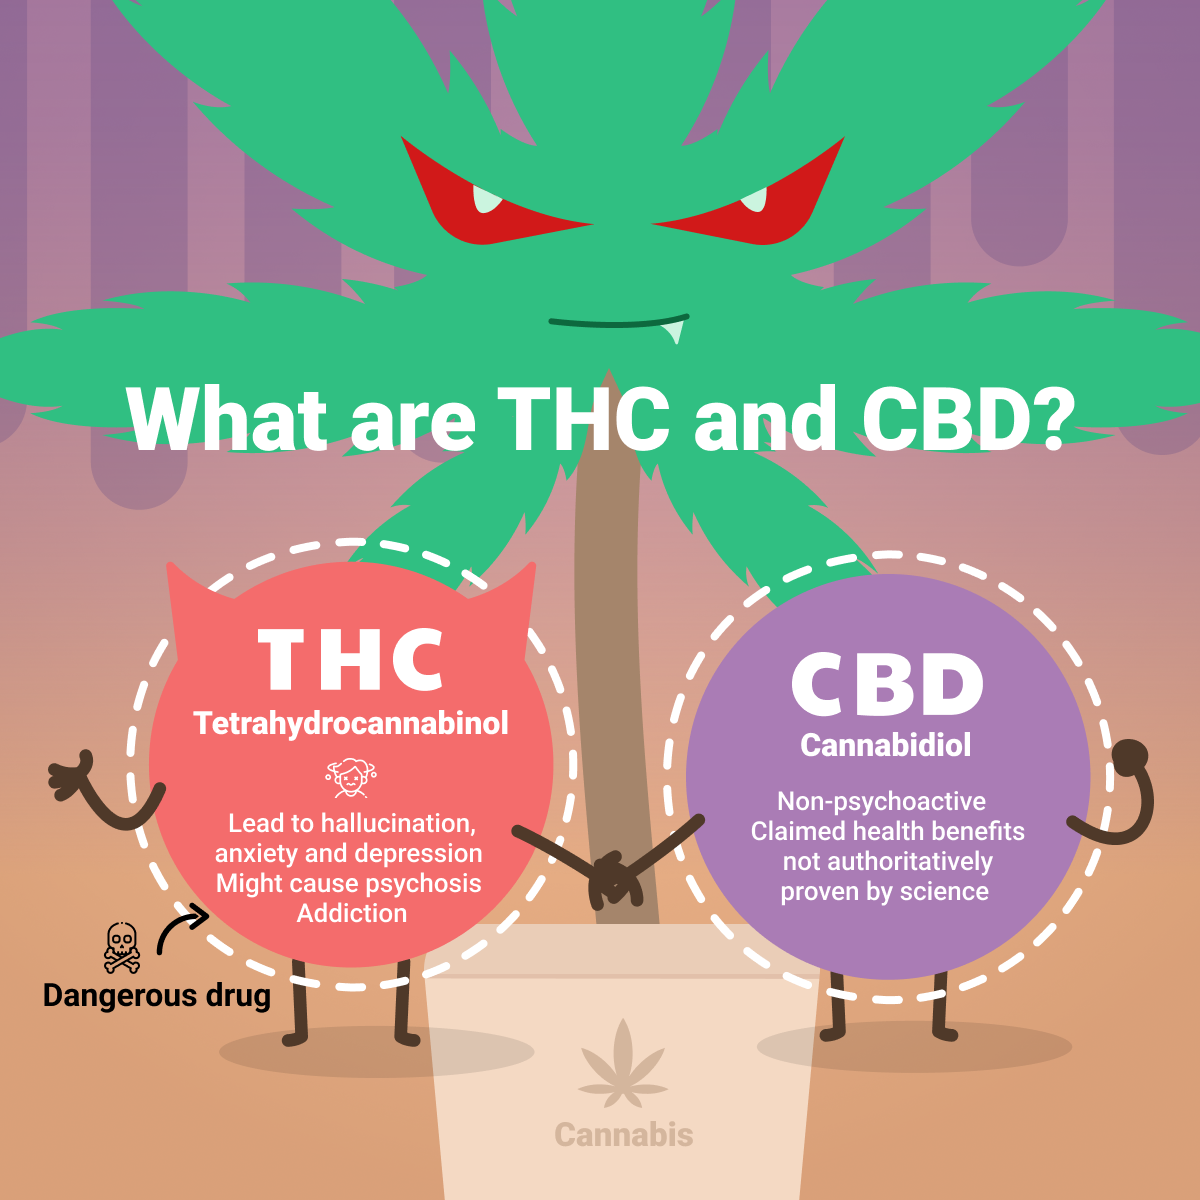 What are THC and CBD?
